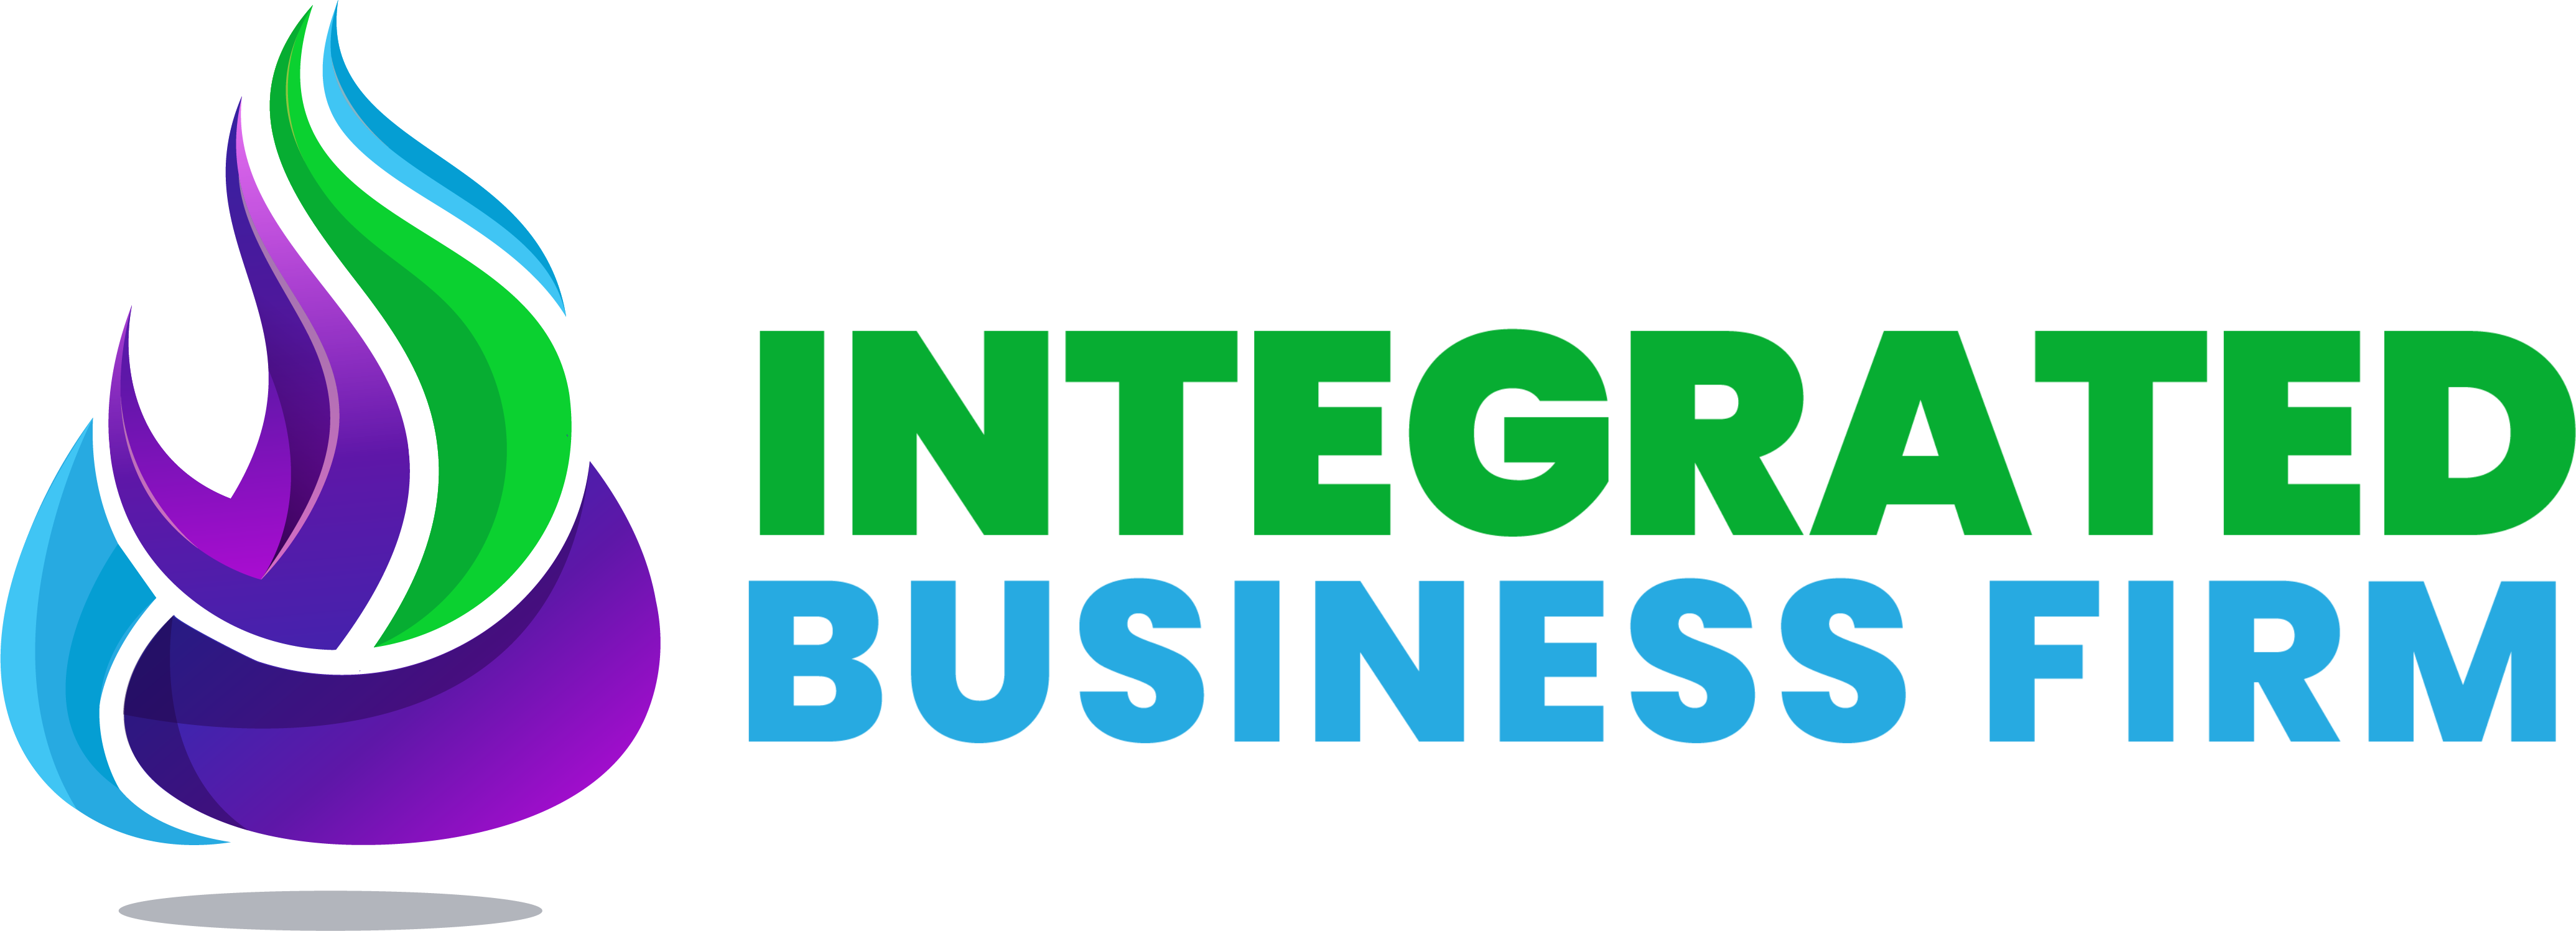 Integrated Business Firm Inc.